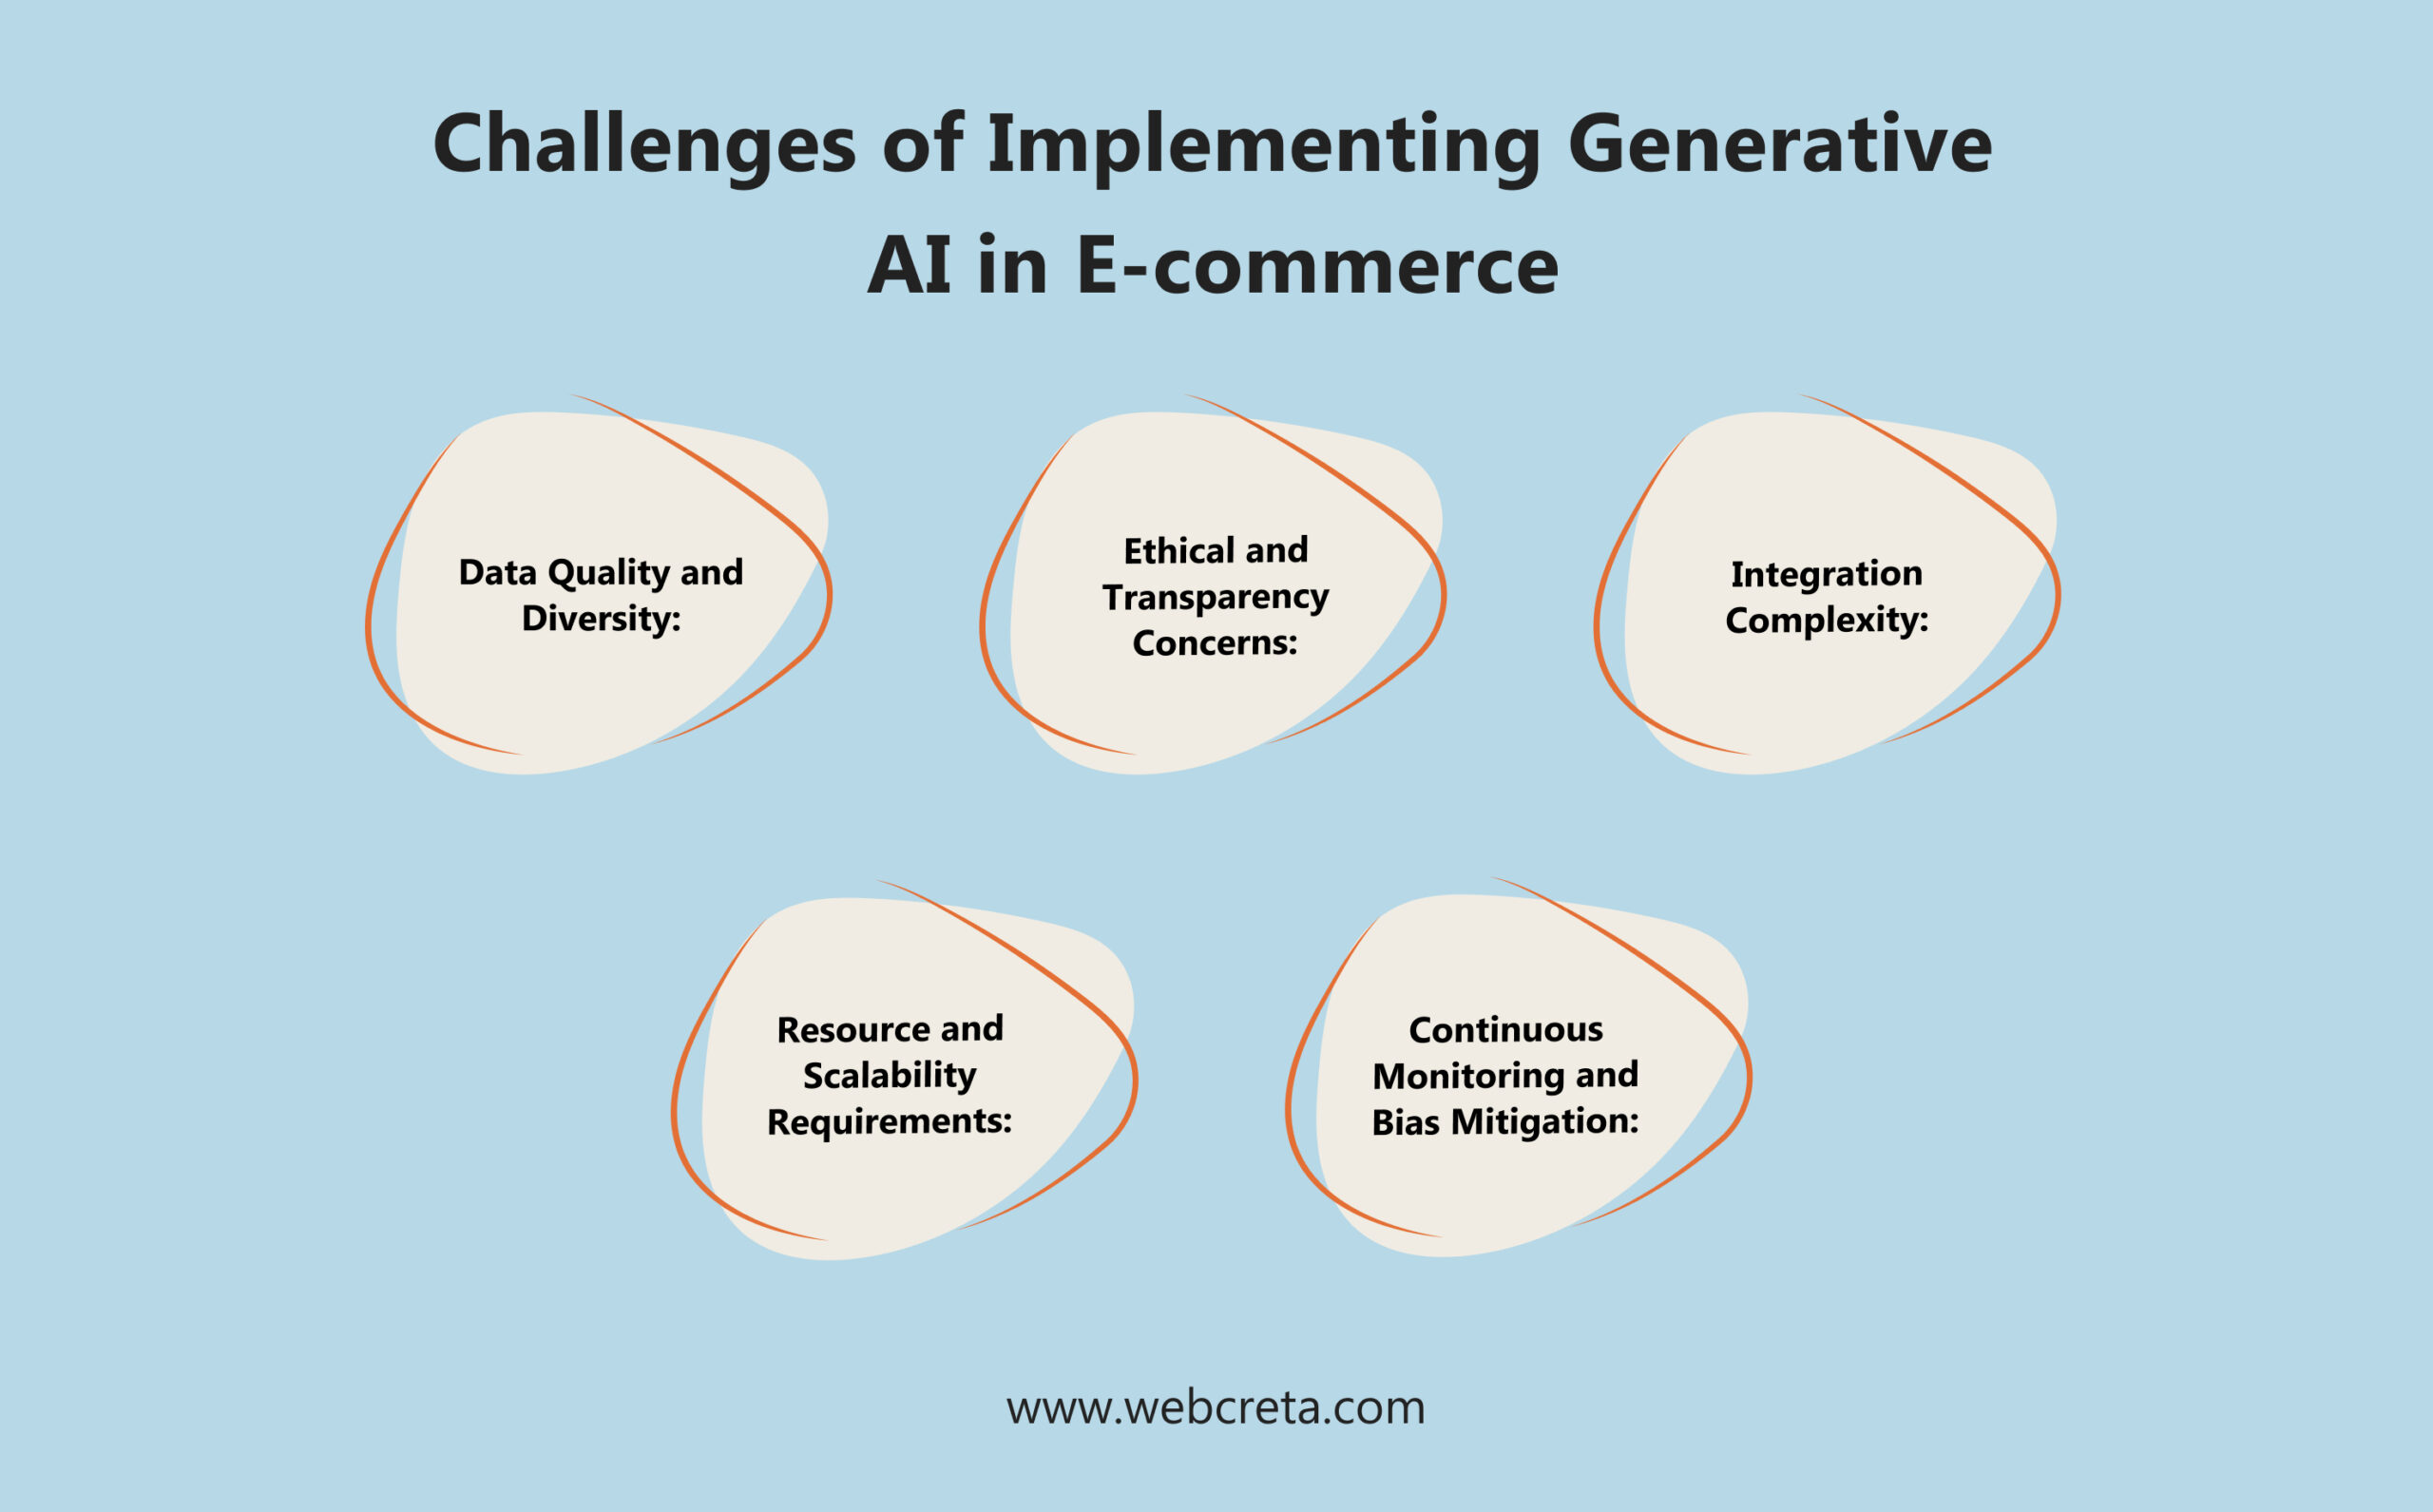 Challenges of Implementing Generative AI in E-commerce